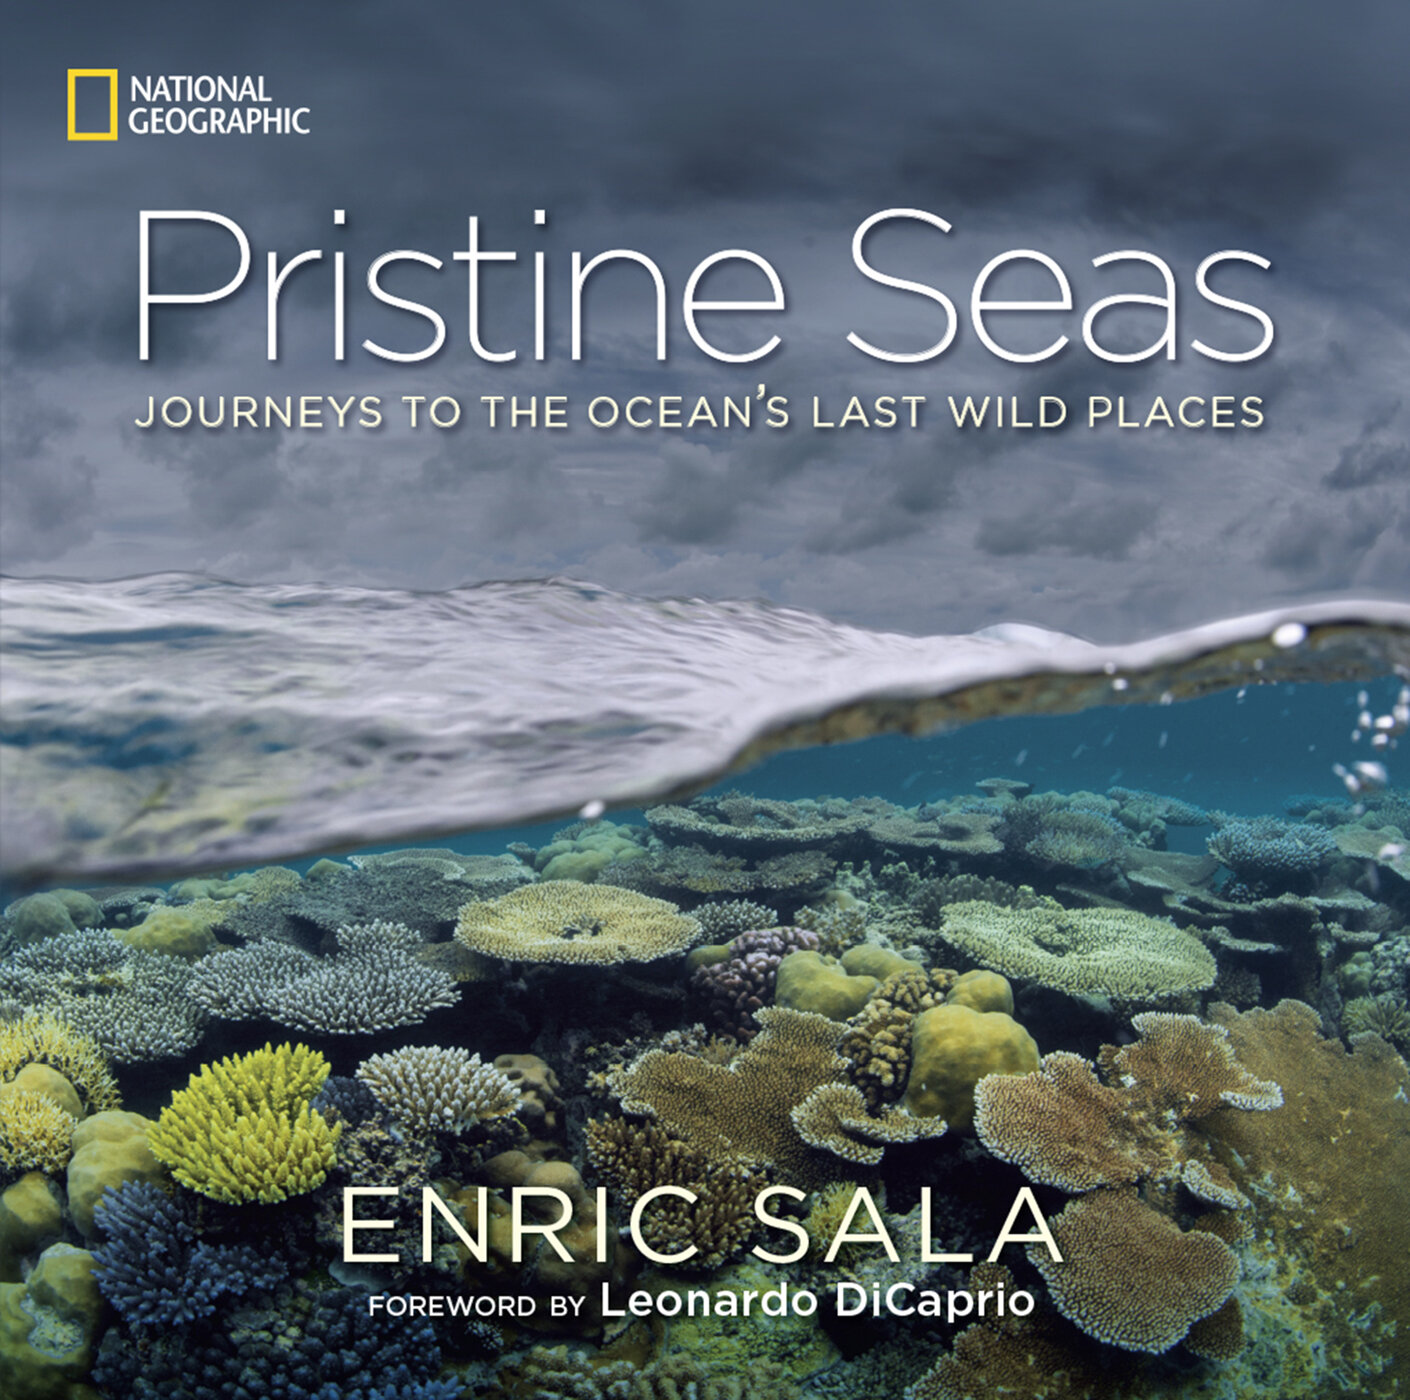 National Geographic Pristine Seas Lifts Anchor on Five-Year Pacific  Expedition to Help Protect Treasure Trove of Ocean Life – National  Geographic Society Newsroom